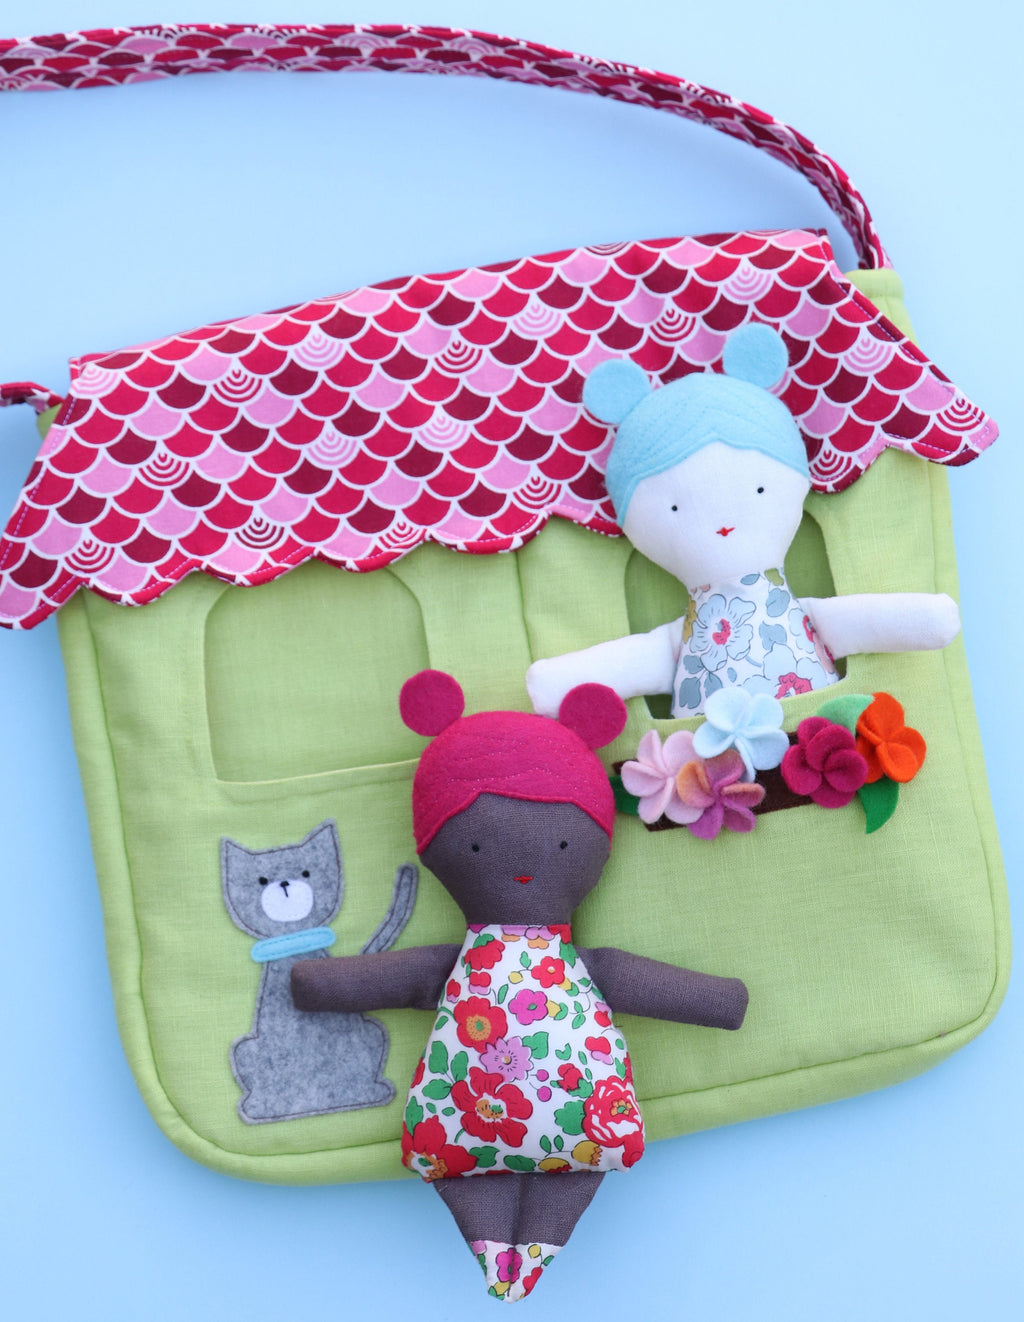 two dolls in a bag that looks like a house